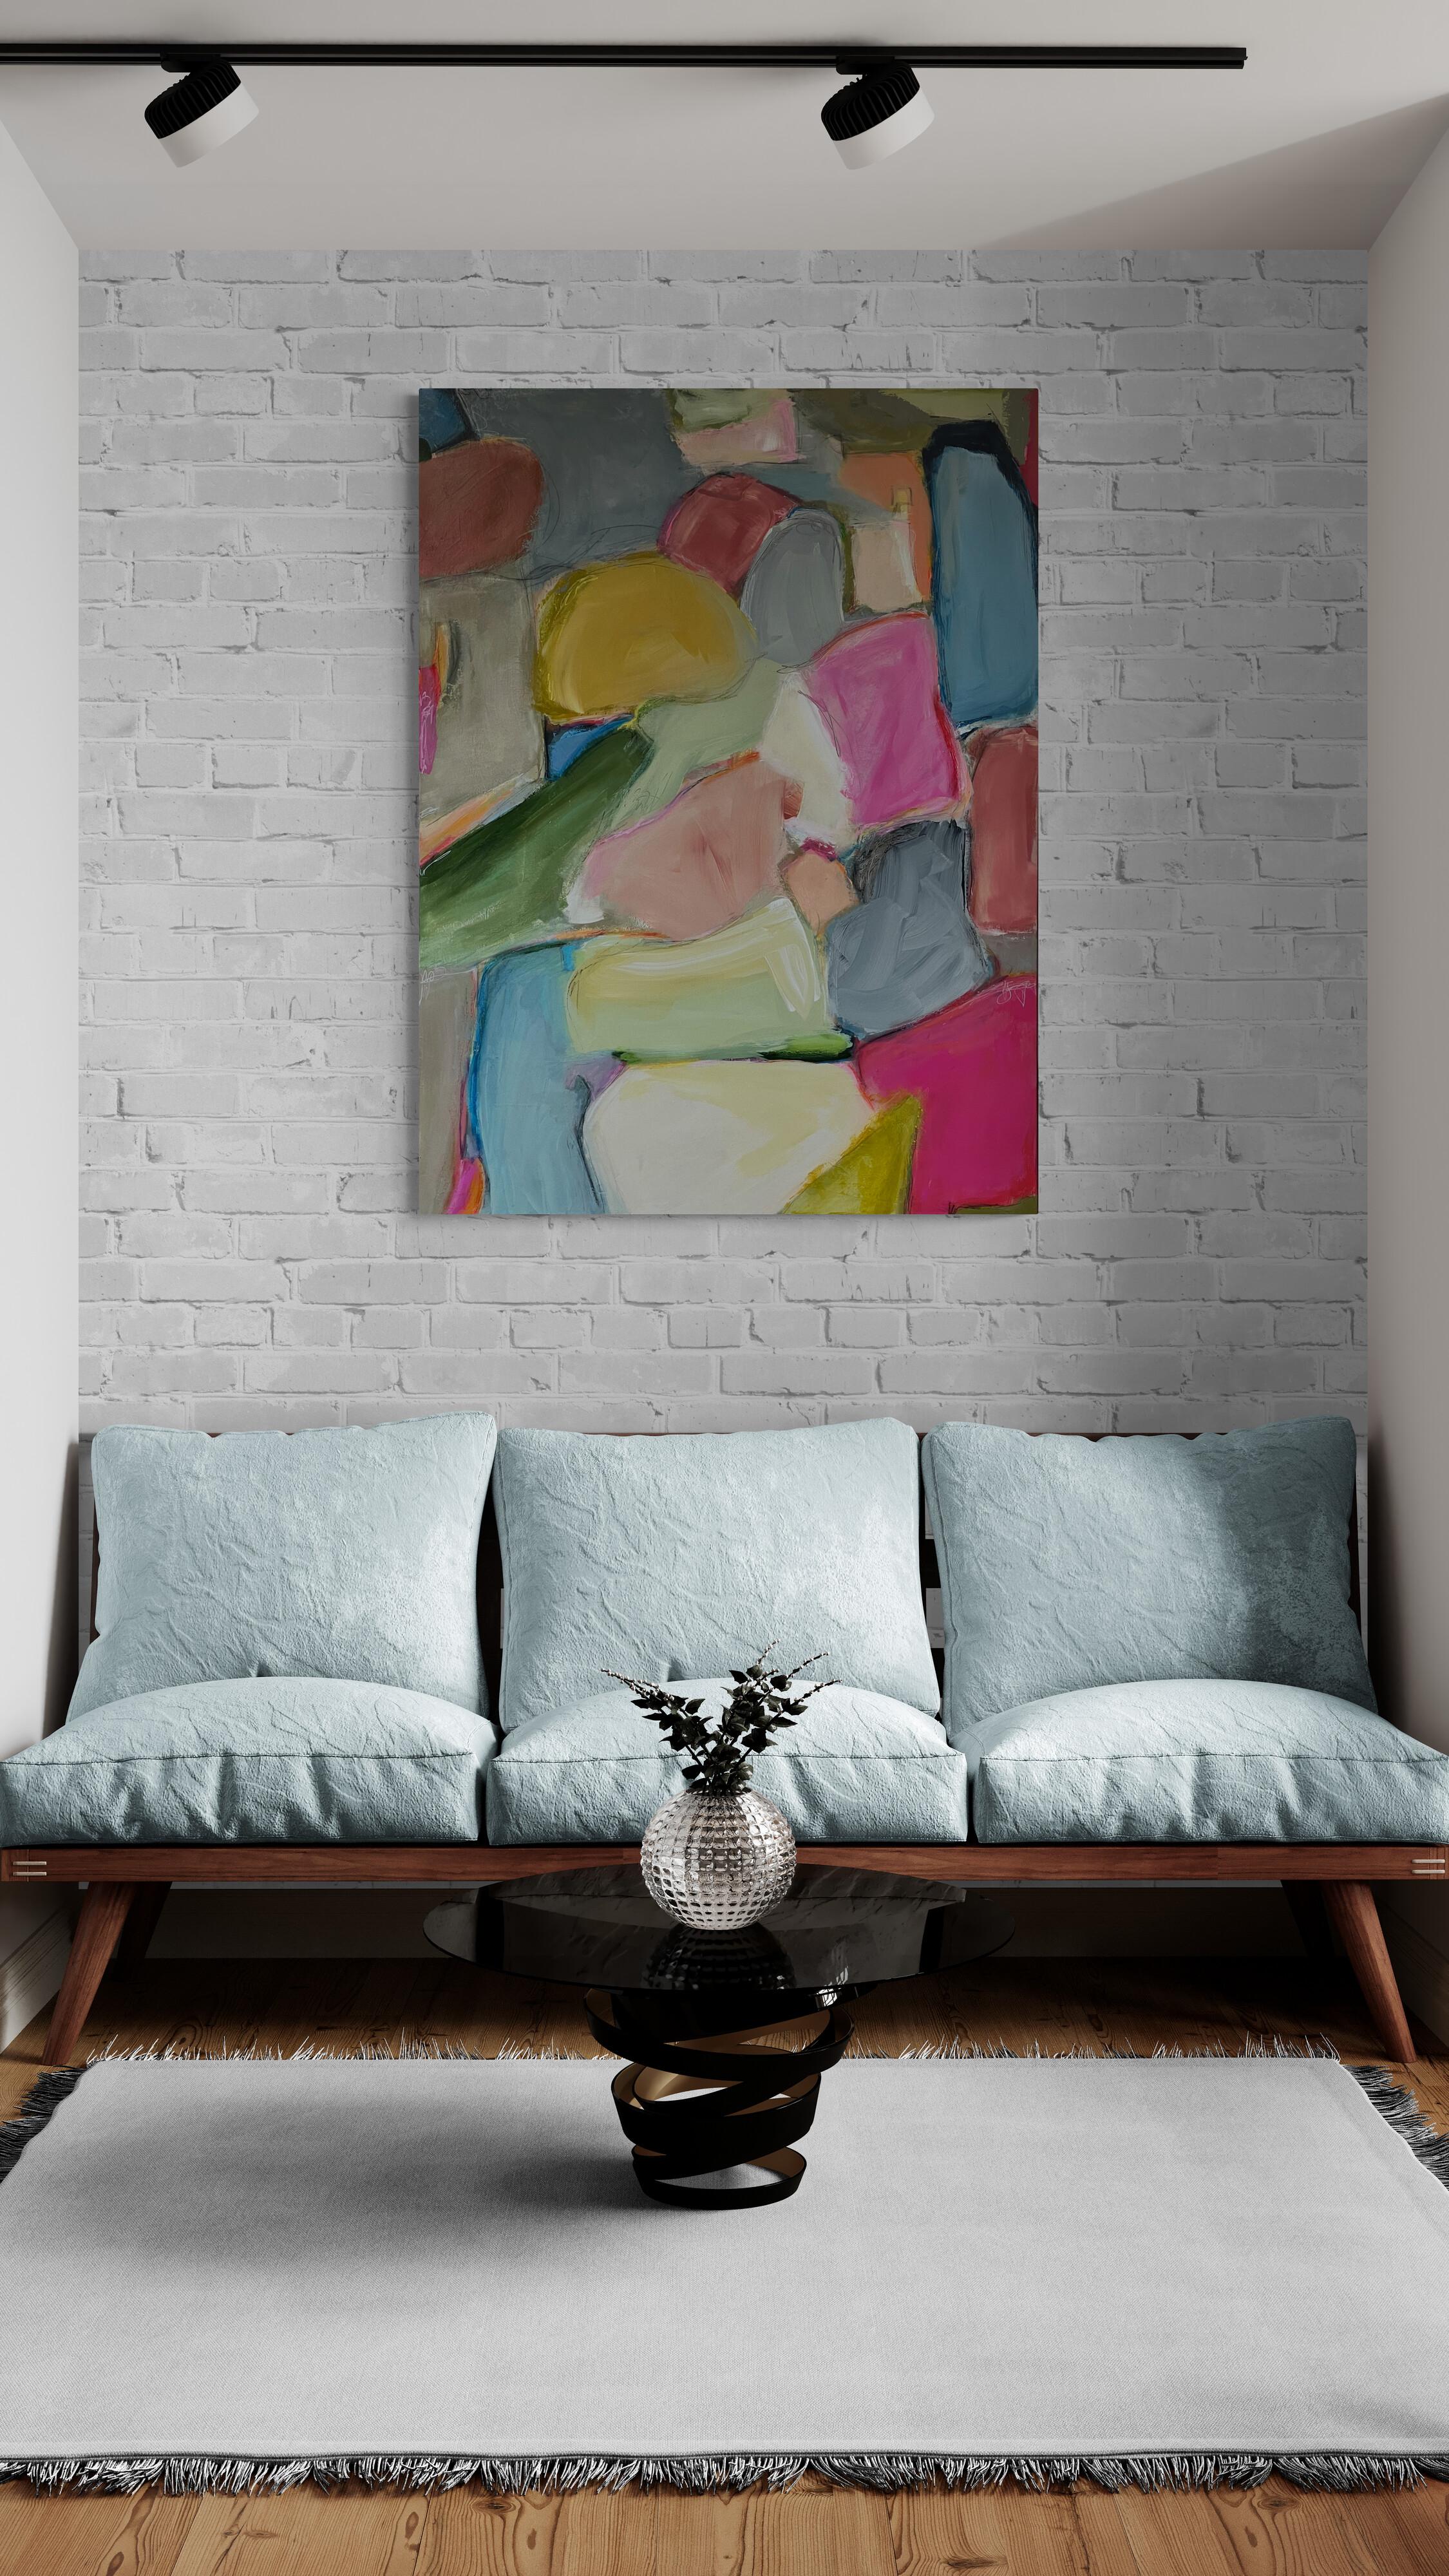 Kelley Carman
Dreaming About You (Abstract, Blues, Green, Gold, Yellow, Pink)
Acrylic and Oil Stick
Year: 2023
Size: 48x36x1.5in
Signed
COA provided 
Ref.: 924802-2042

Tags: Abstract, Blues, Green, Gold, Yellow, Pink  

-----

Kelley Carman